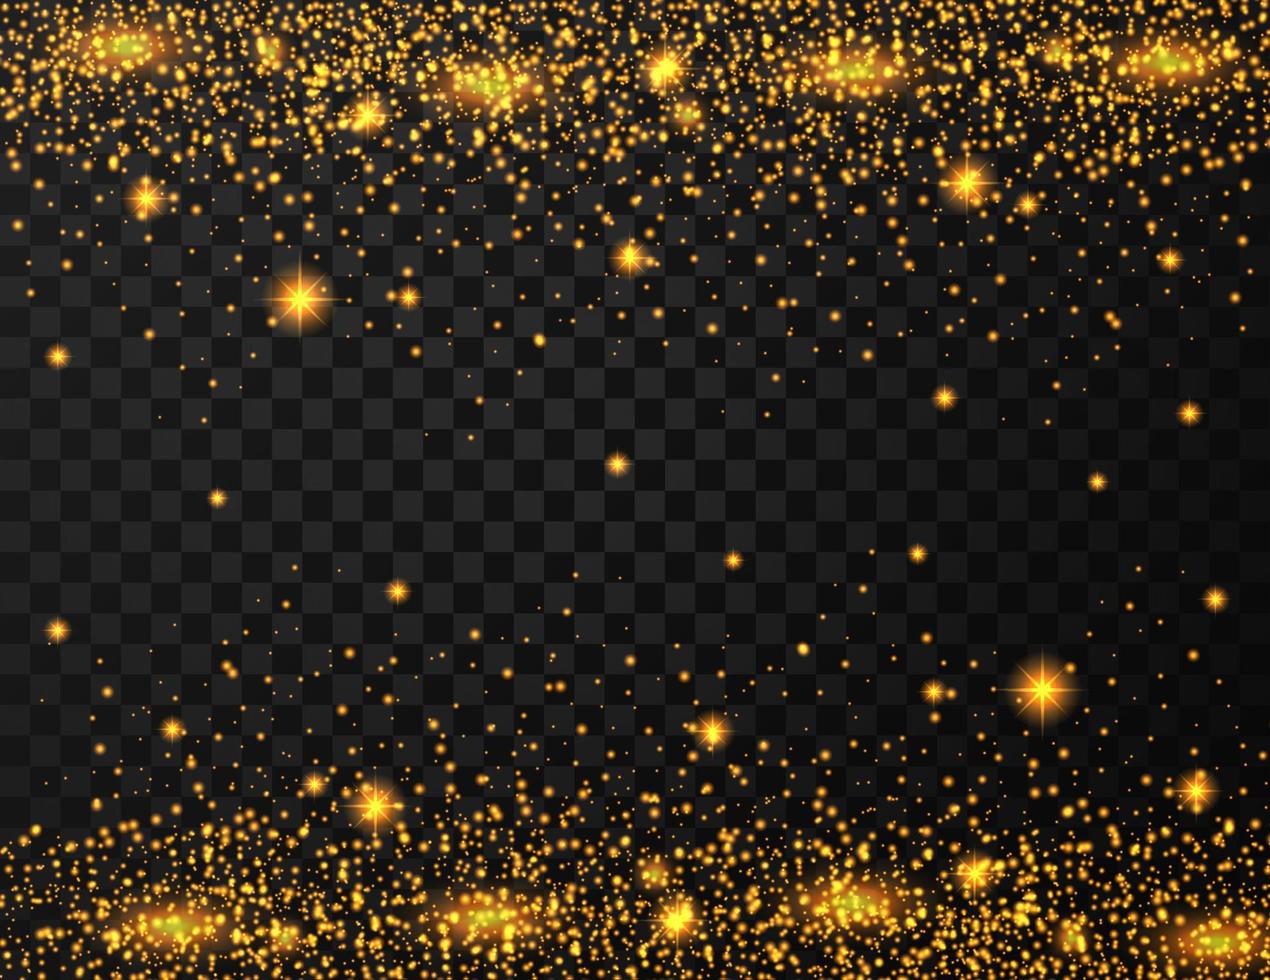 Gold glitter texture on transparent background vector